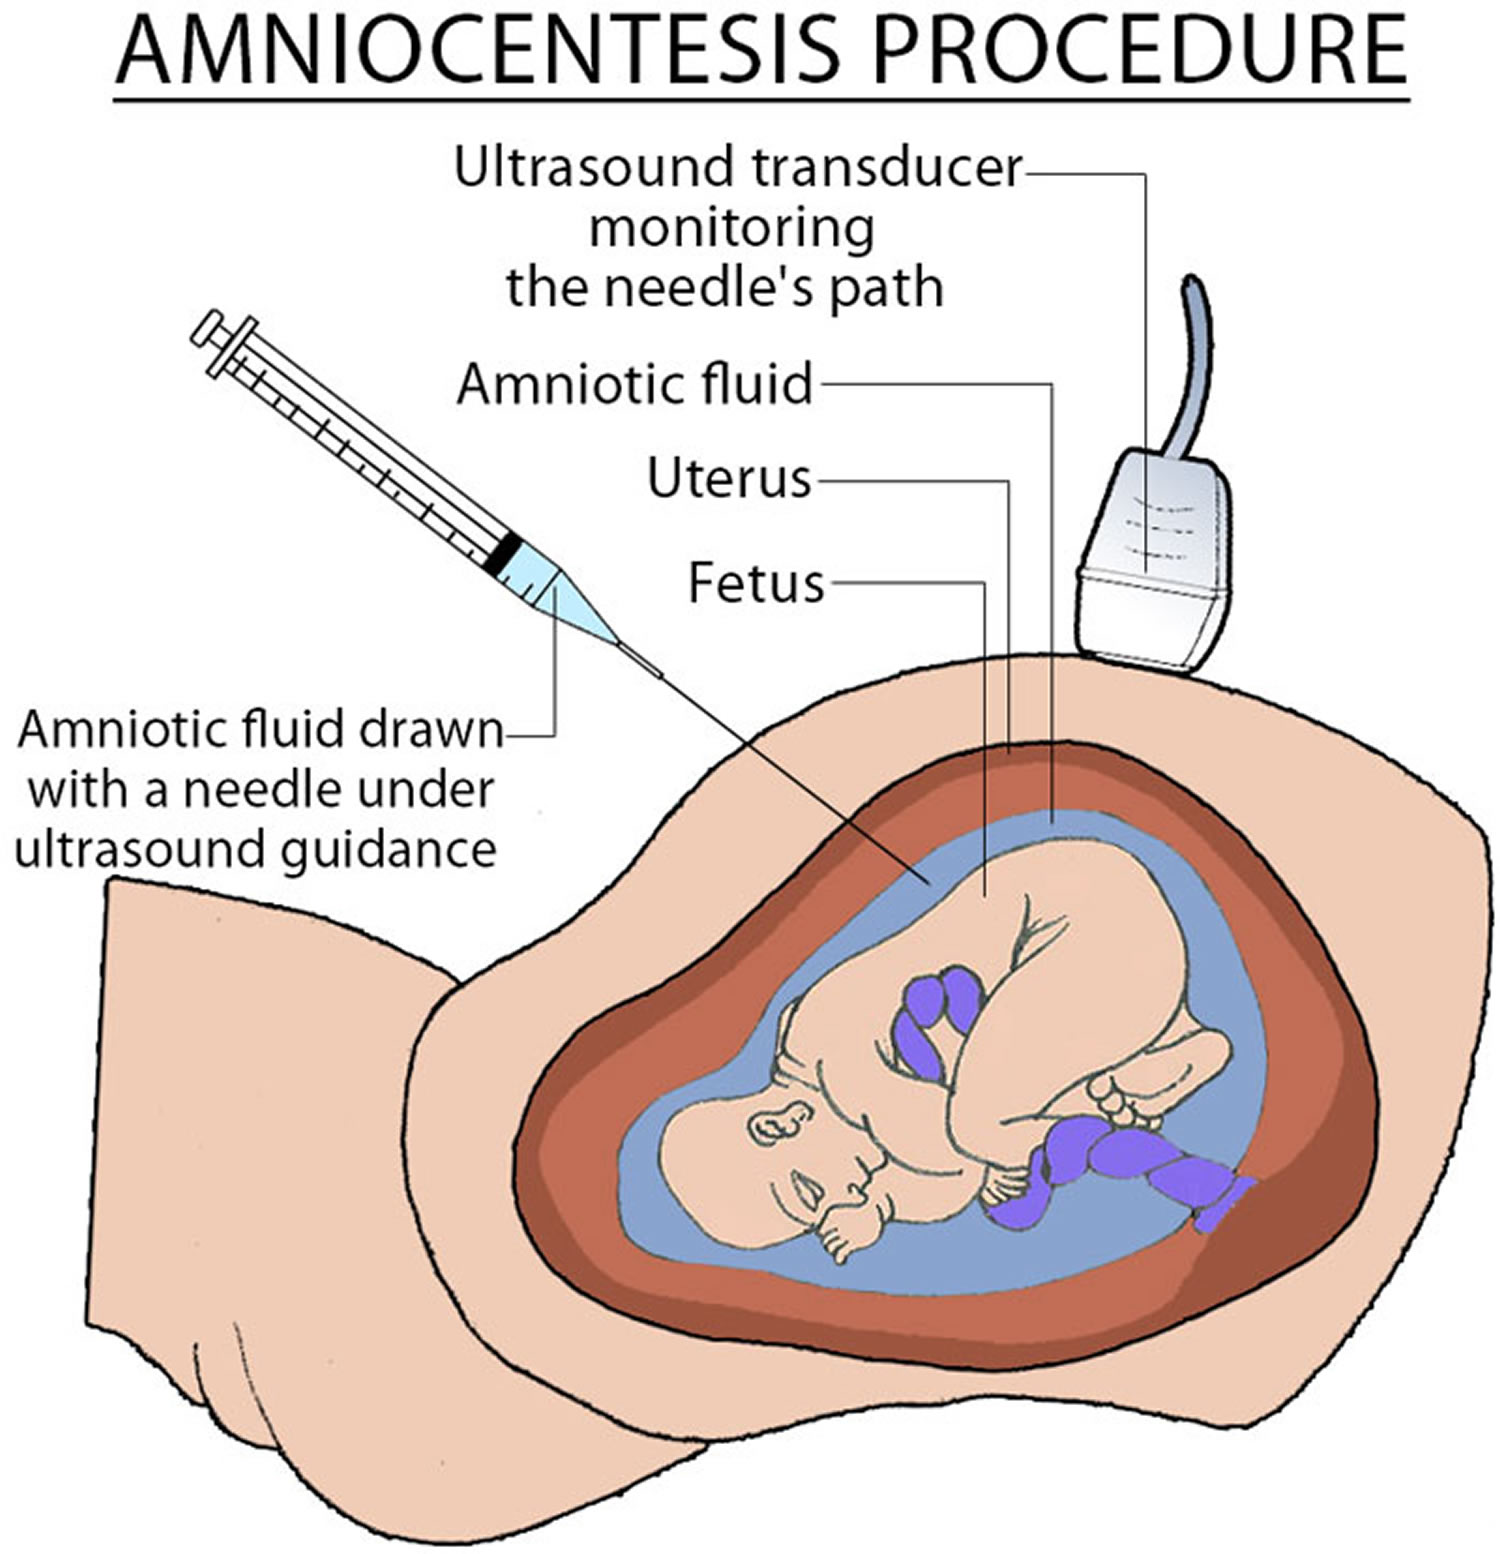 Tax lien investing risks of amniocentesis financial sound